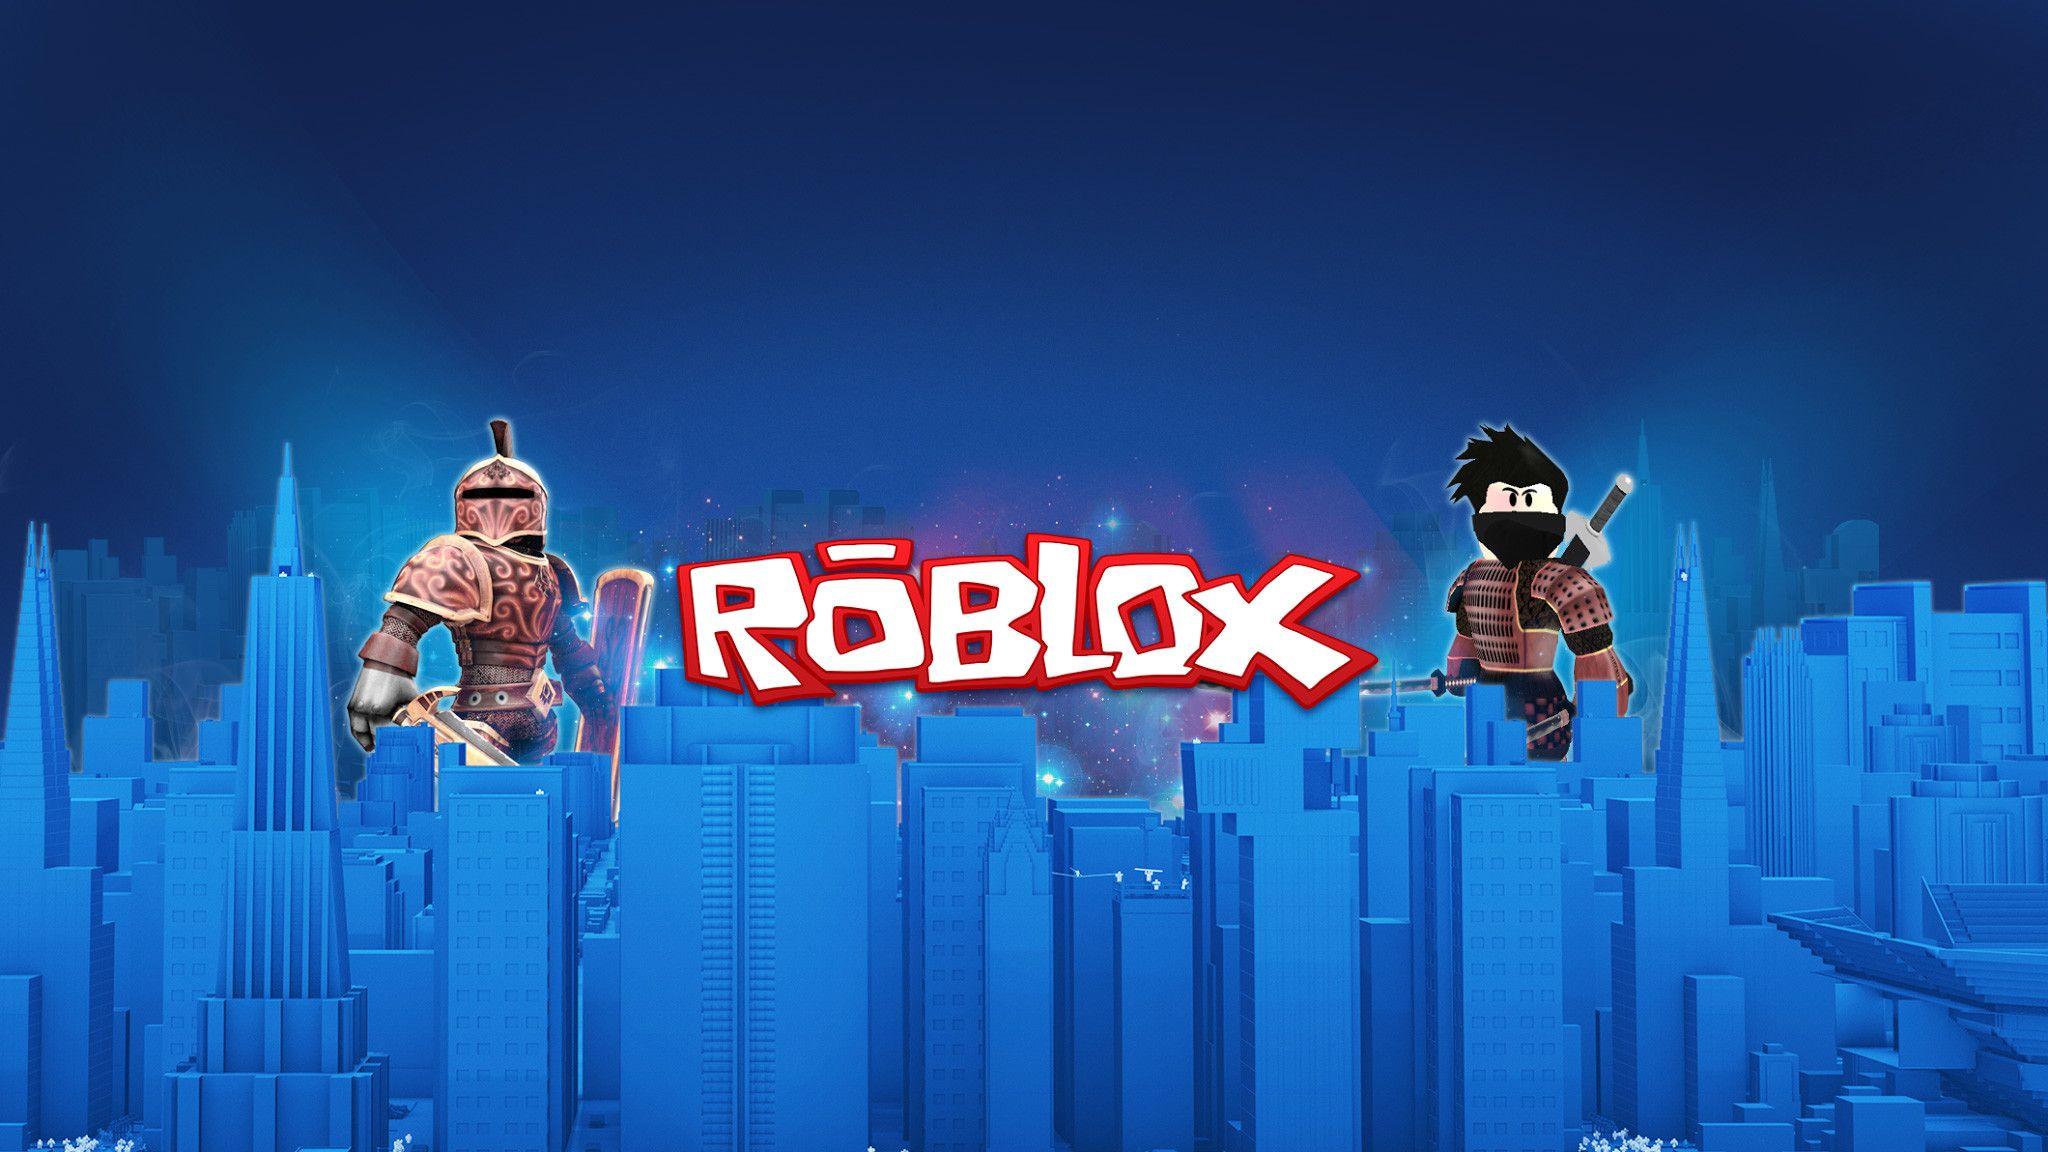 Cute Roblox Wallpapers Top Free Cute Roblox Backgrounds Wallpaperaccess - roblox bff pictures cute